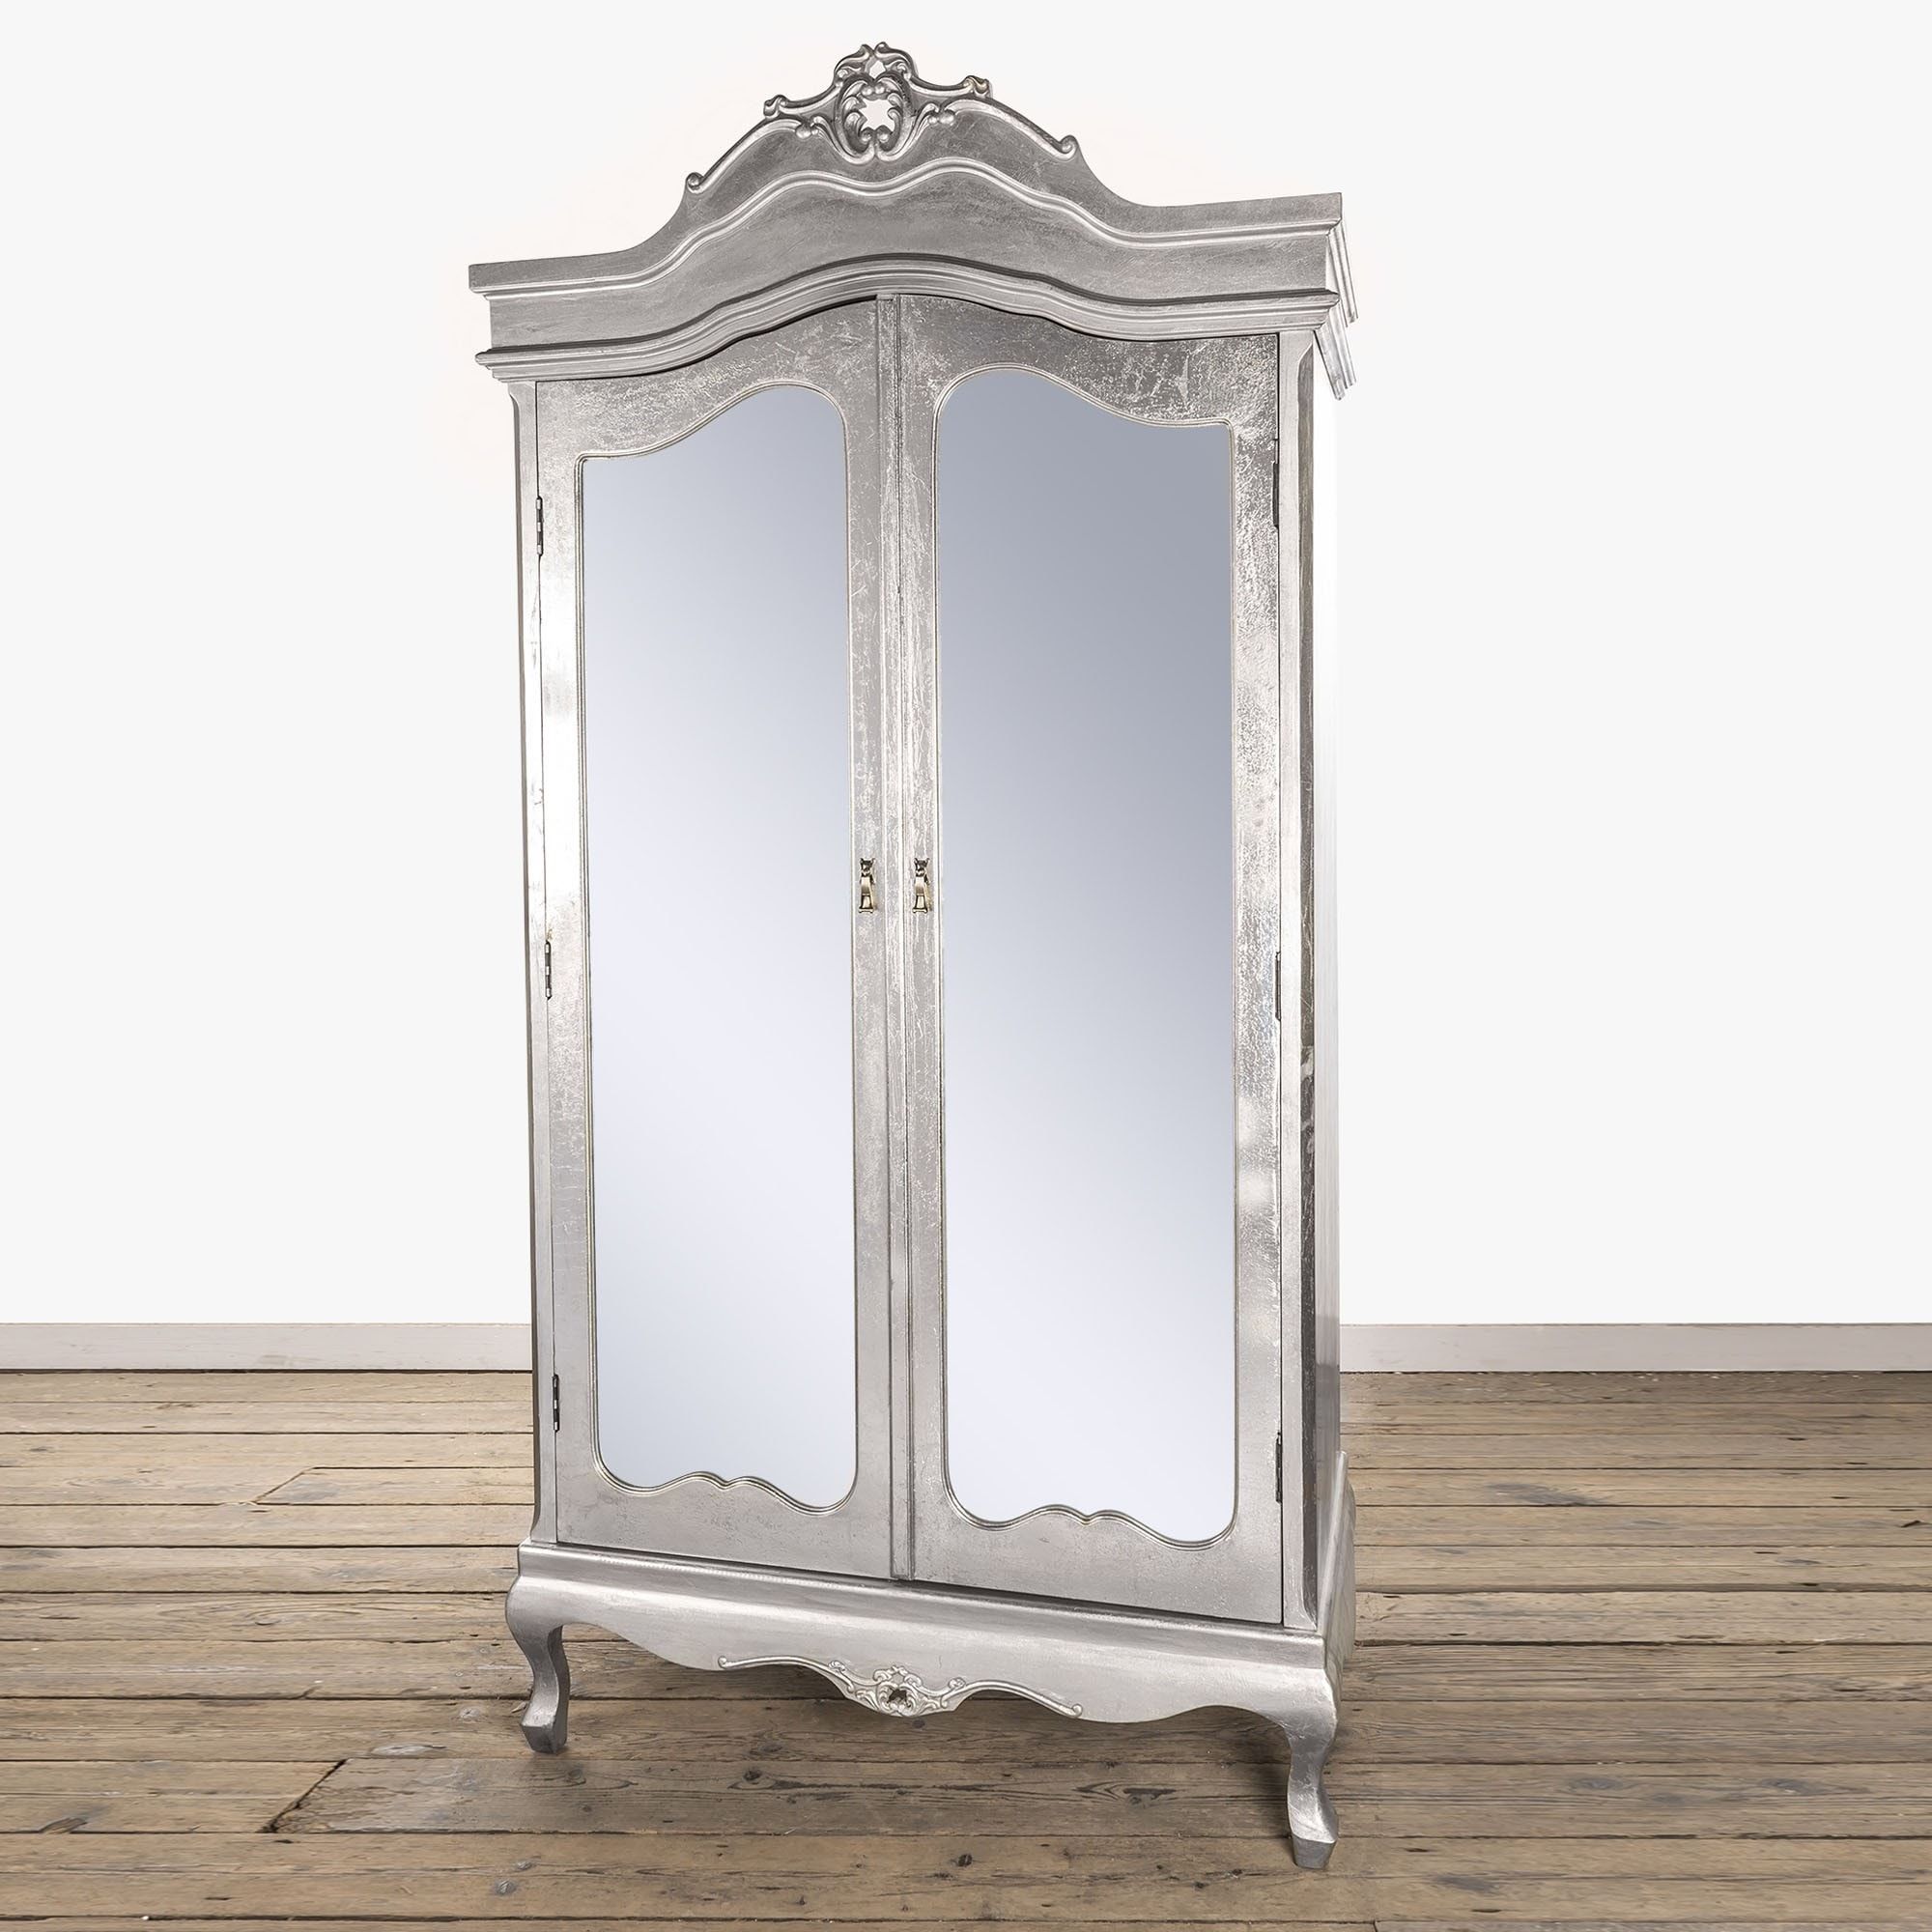 Antique French Styled Silver Annabelle Mirrored Wardrobe | Mirrored Wardrobe For Silver Wardrobes (View 10 of 15)